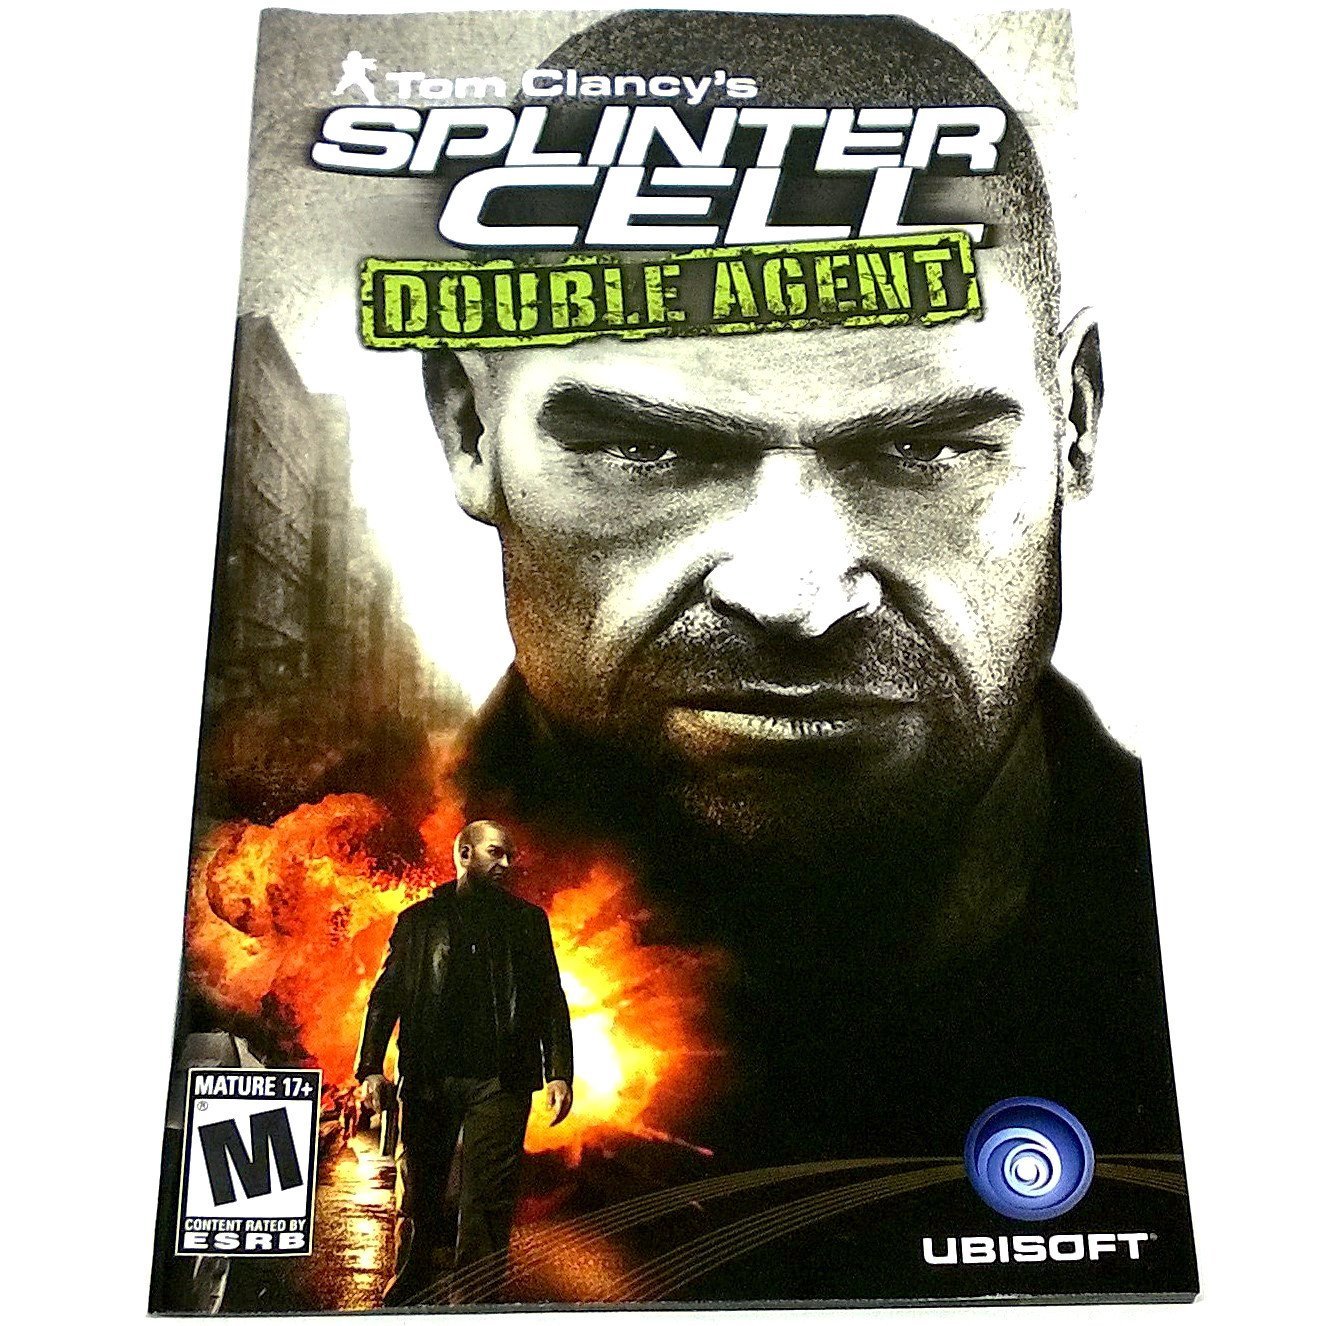 Tom Clancy's Splinter Cell: Double Agent for PlayStation 2 - Front of manual